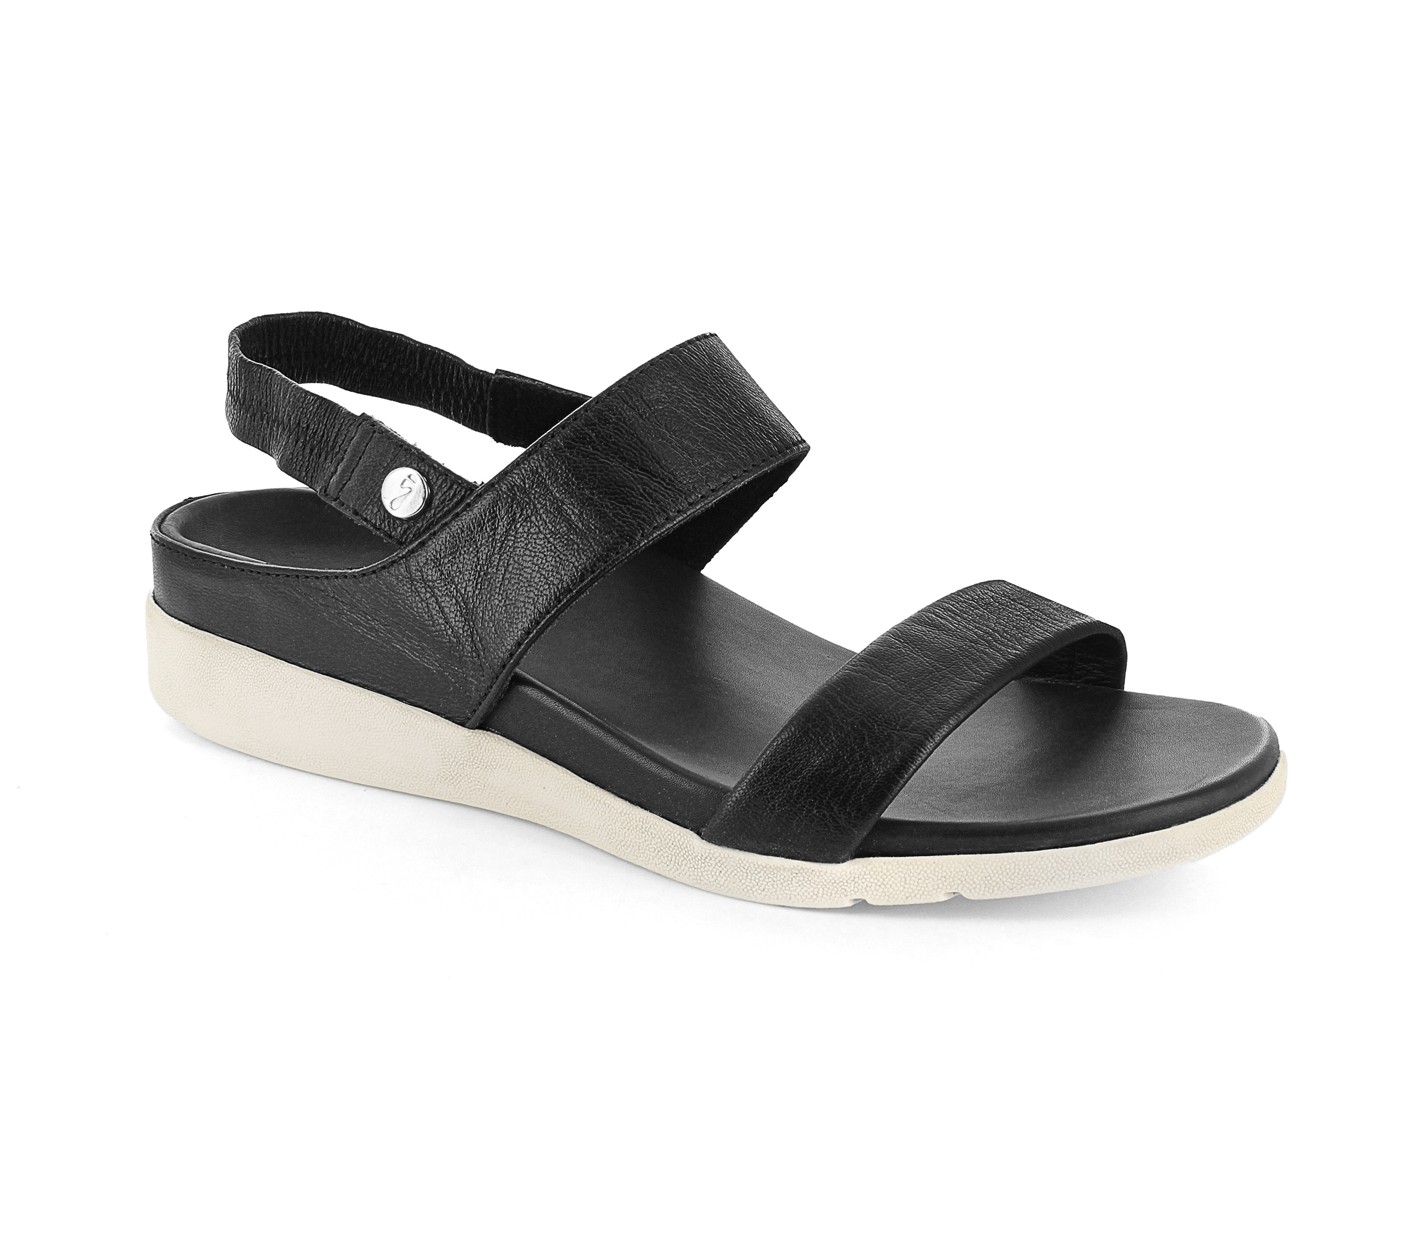 Strive Isla - Women's Supportive Sandals - Free Shipping & Free Returns